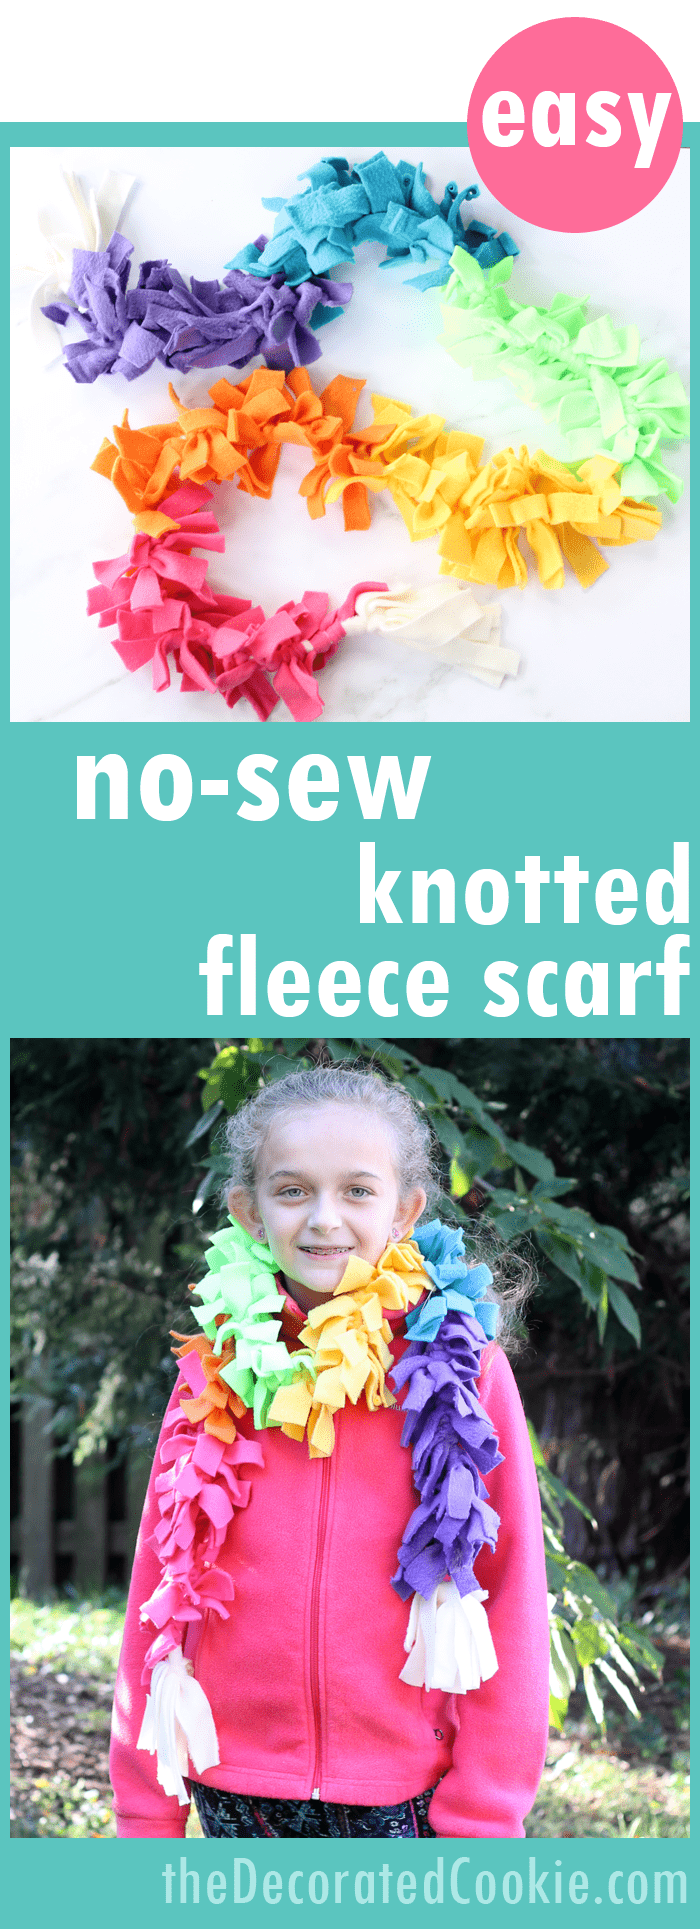 This no-sew rainbow knotted fleece scarf is the perfect homemade holiday gift kids can make. Printable instructions and video how-tos included. 